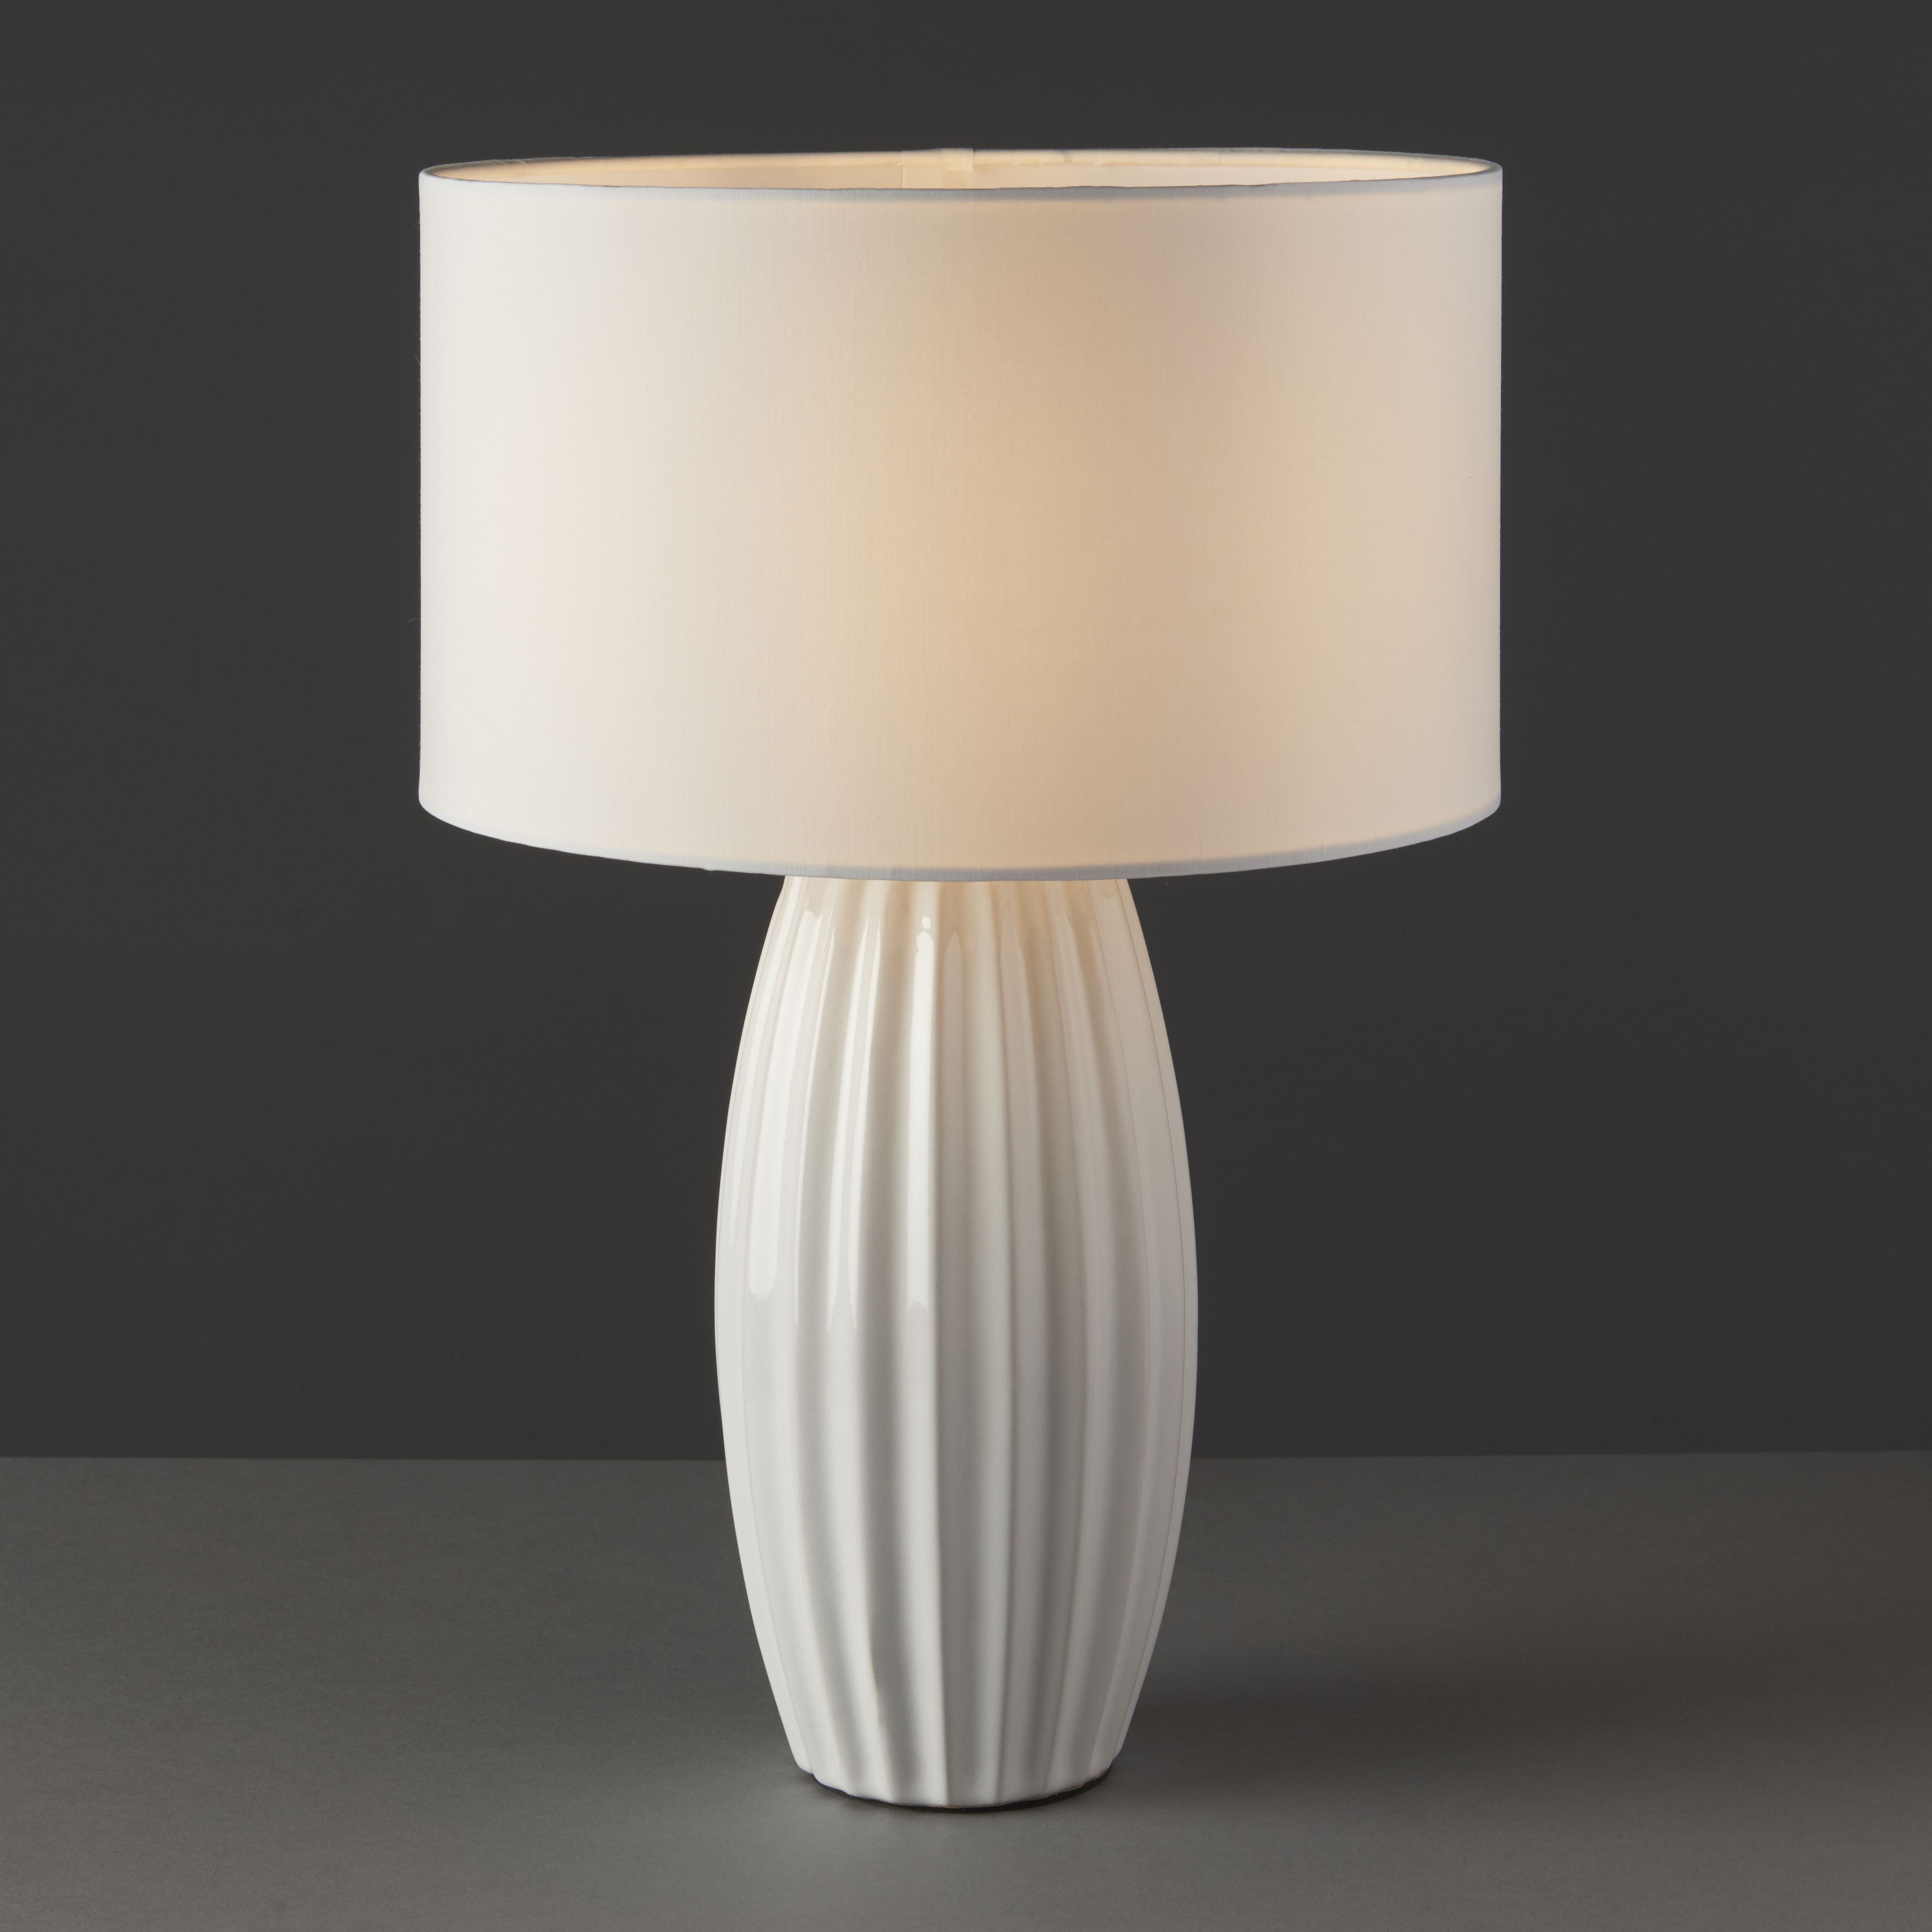 Harbour Studio Tosan Ribbed crackle Ivory Chrome effect Table light